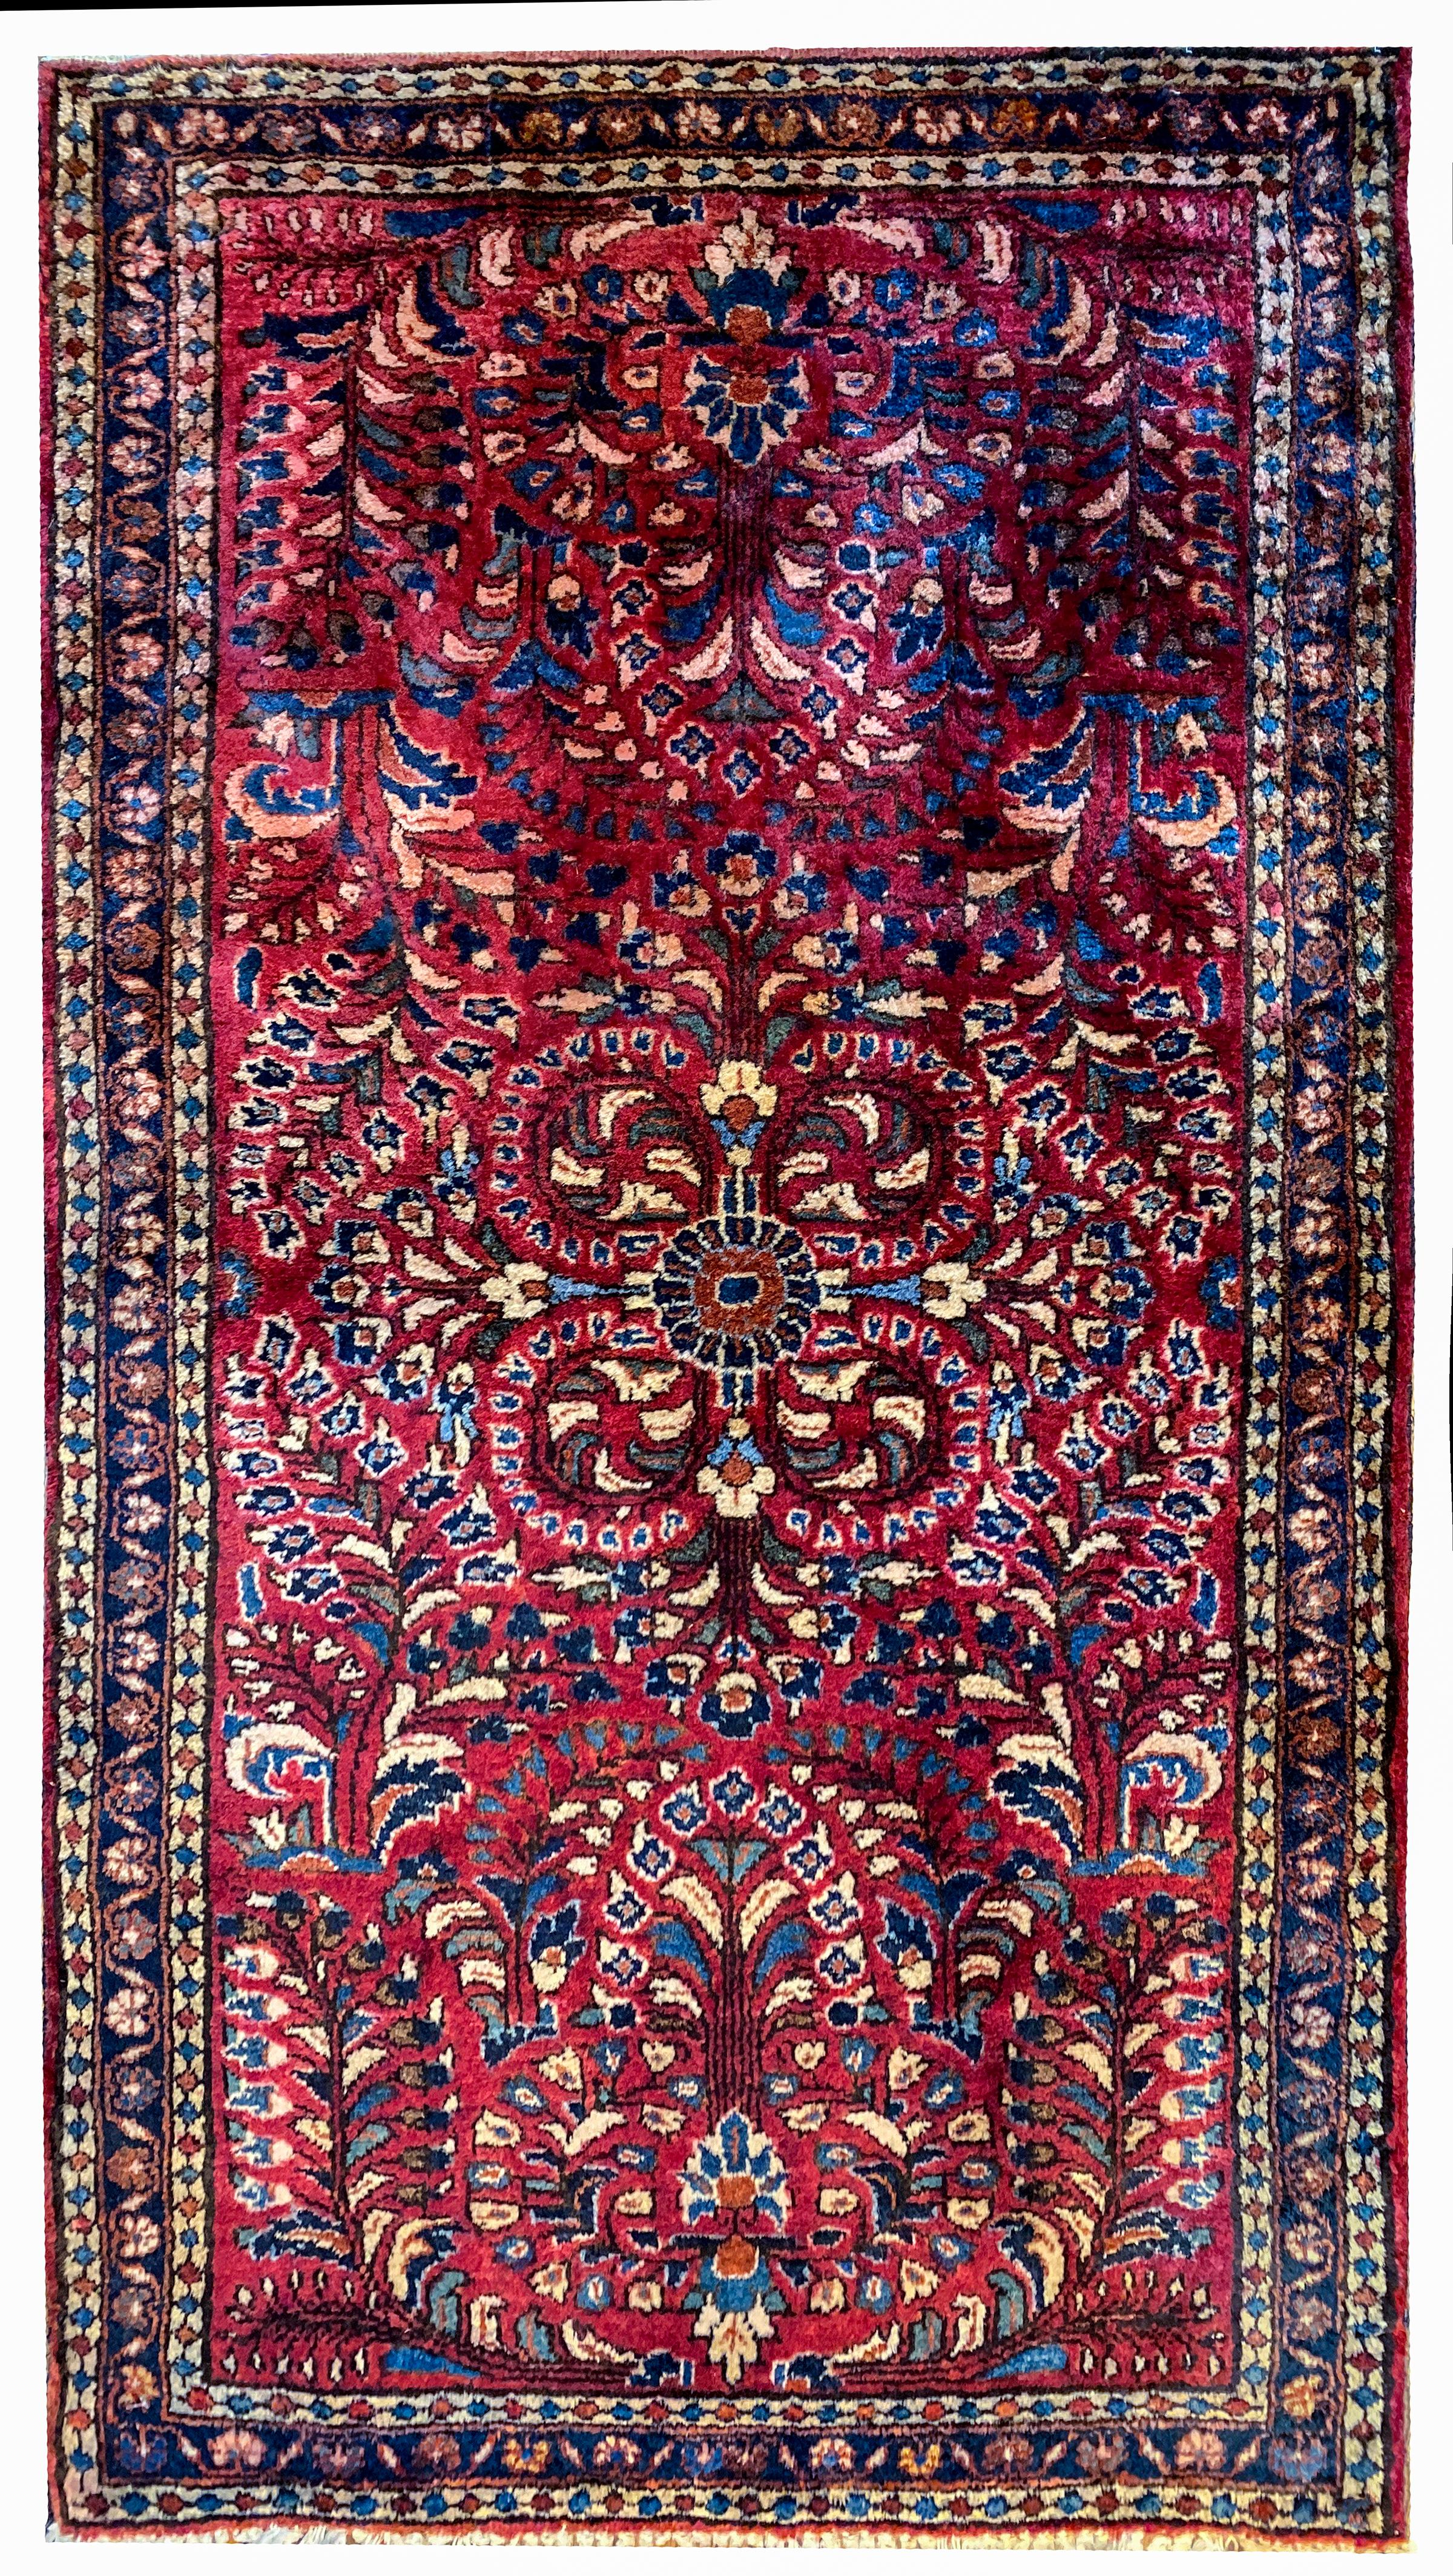 A beautiful early 20th century Persian Sarouk rug with a traditional mirrored tree-of-life pattern including myriad flowers and scrolling vines woven in light and dark indigo, cream, green, and brown, on a bold dark cranberry background. The border